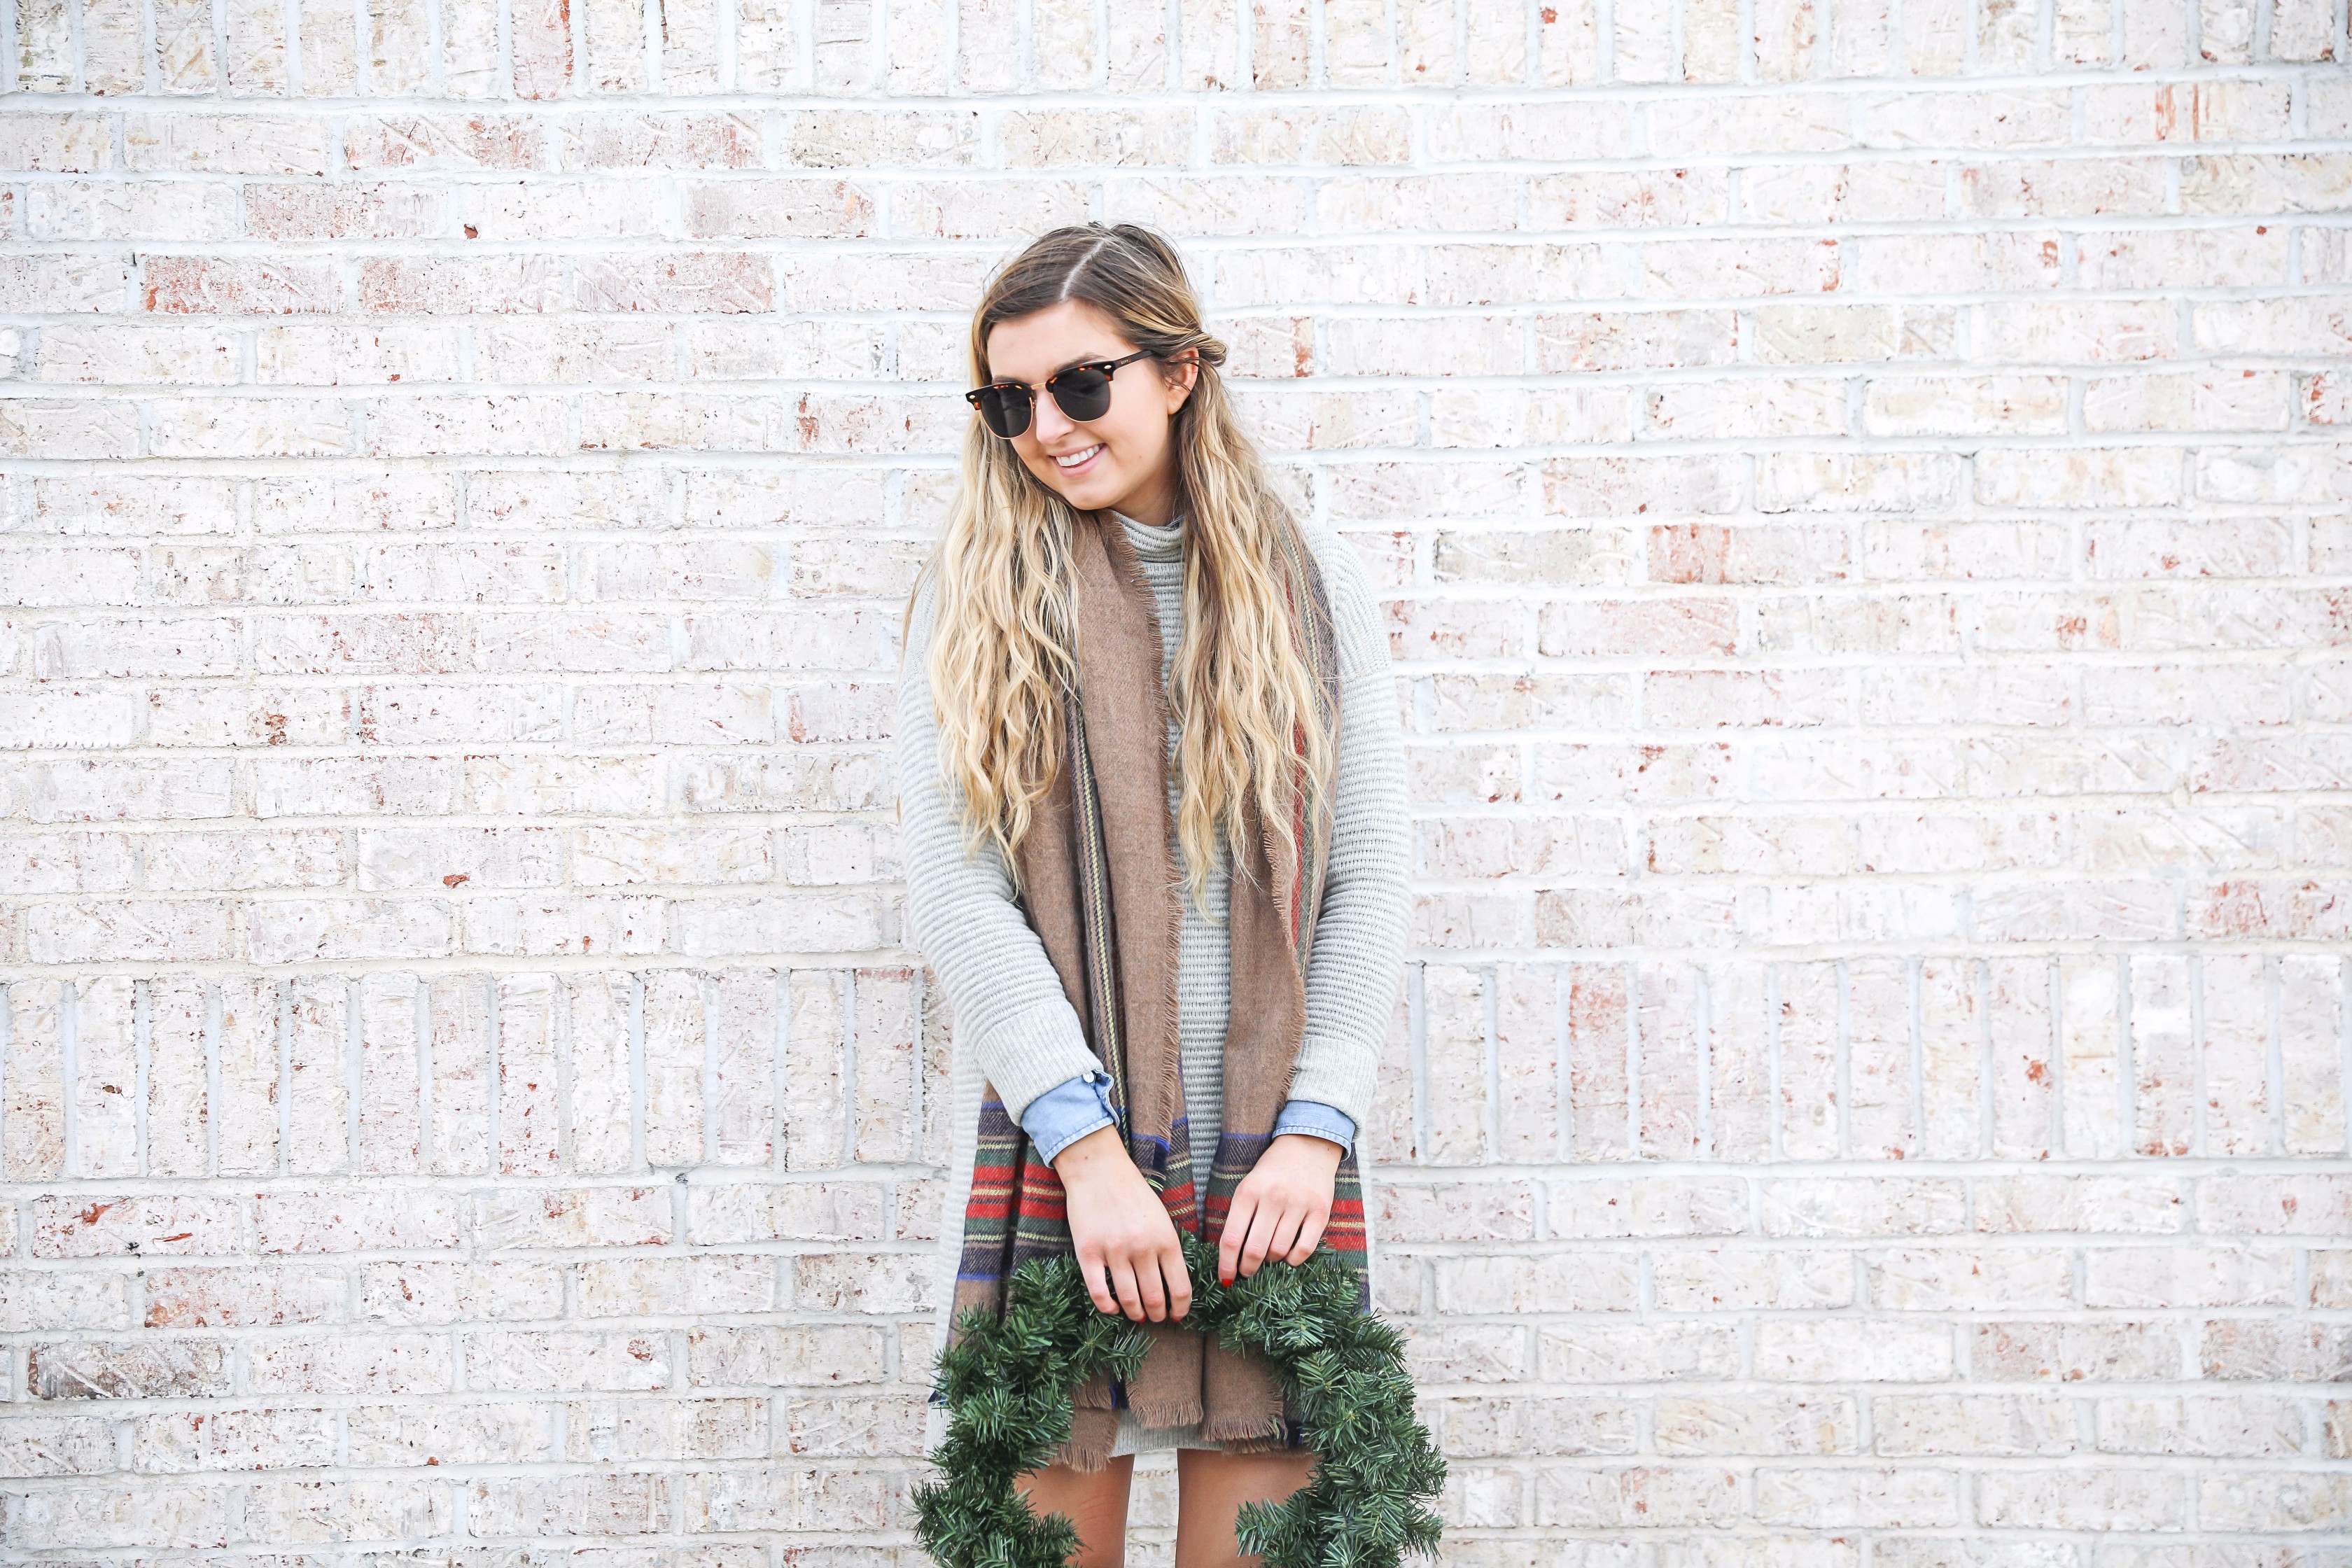 Grey sweater dress layered wtih a chambray top and plaid scarf! Paired with my favorite riding boots by frye boots! Photos taken with a christmas wreath. Christmas wreath photos by lauren lindmark on the blog daily dose of charm